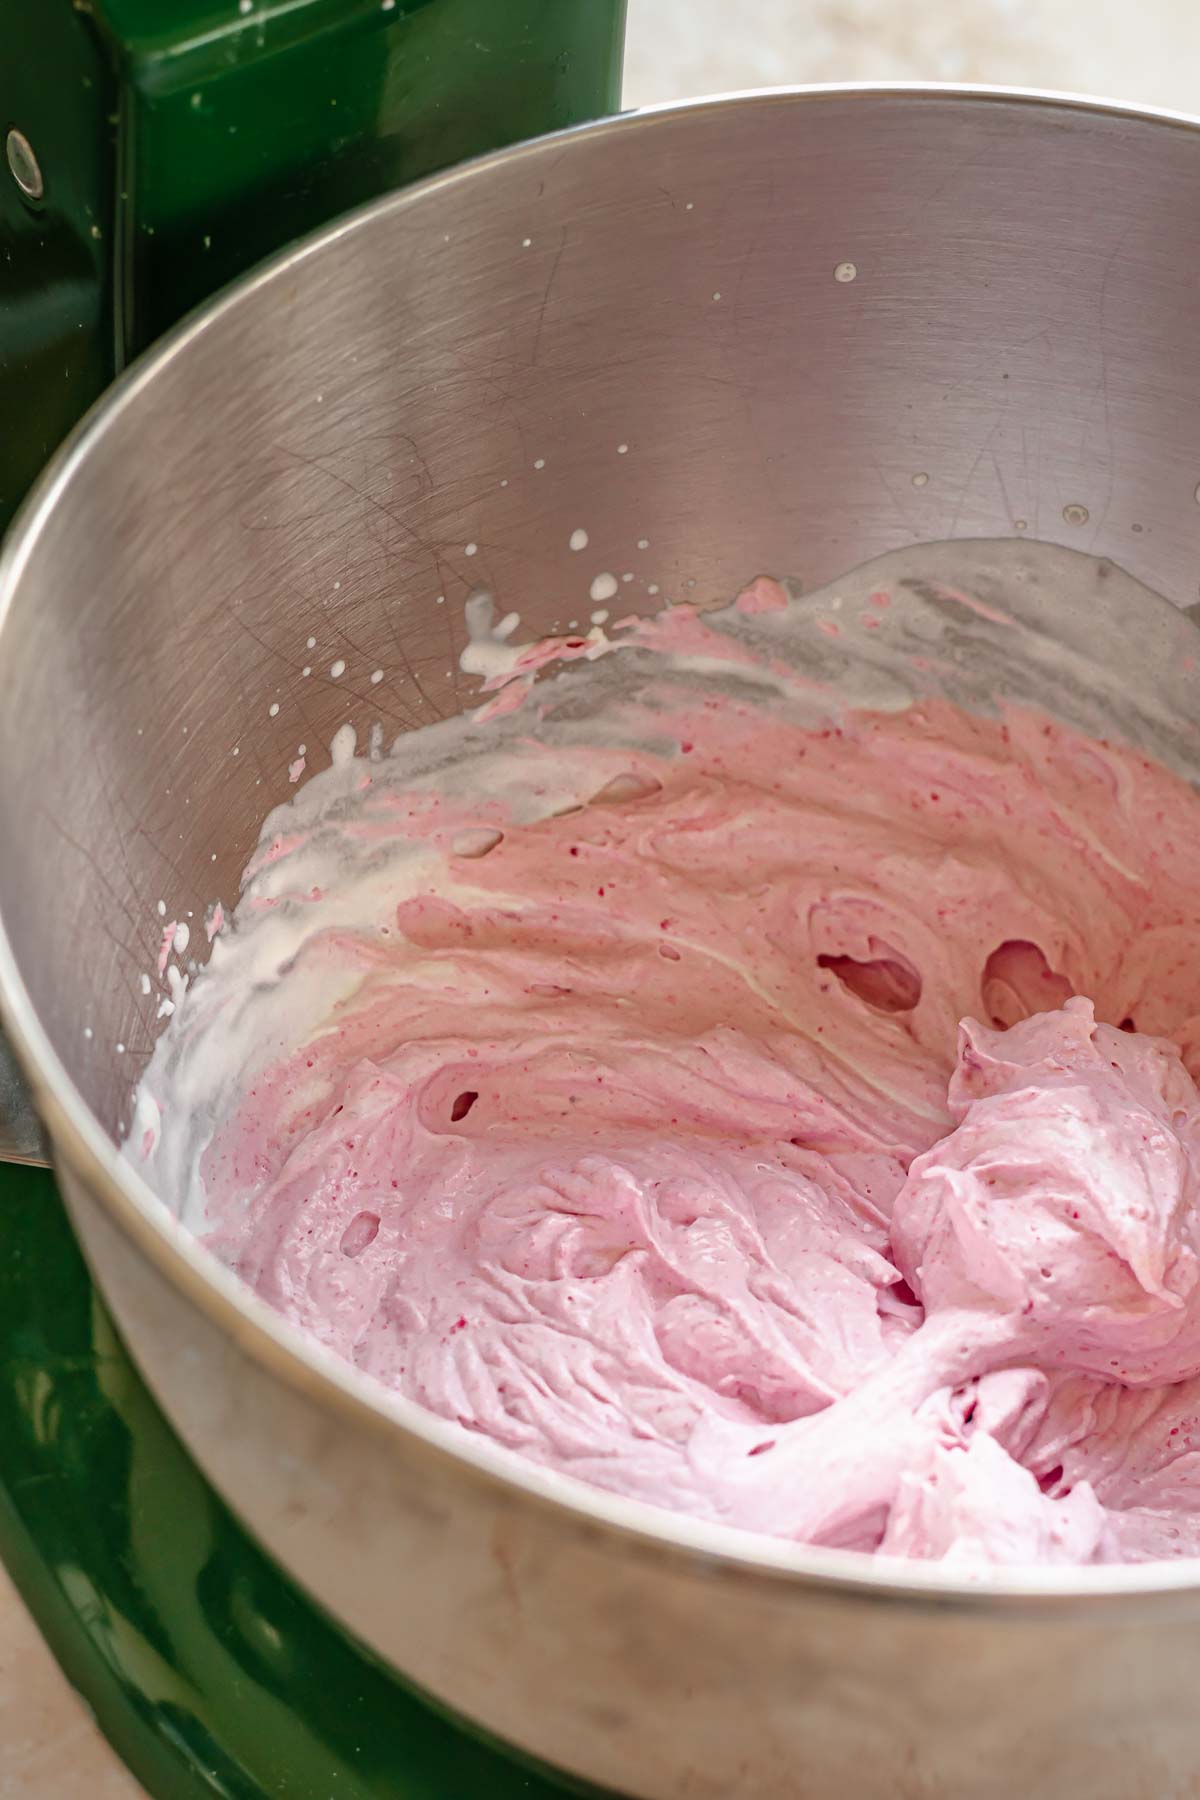 Raspberry whipped cream in a bowl.